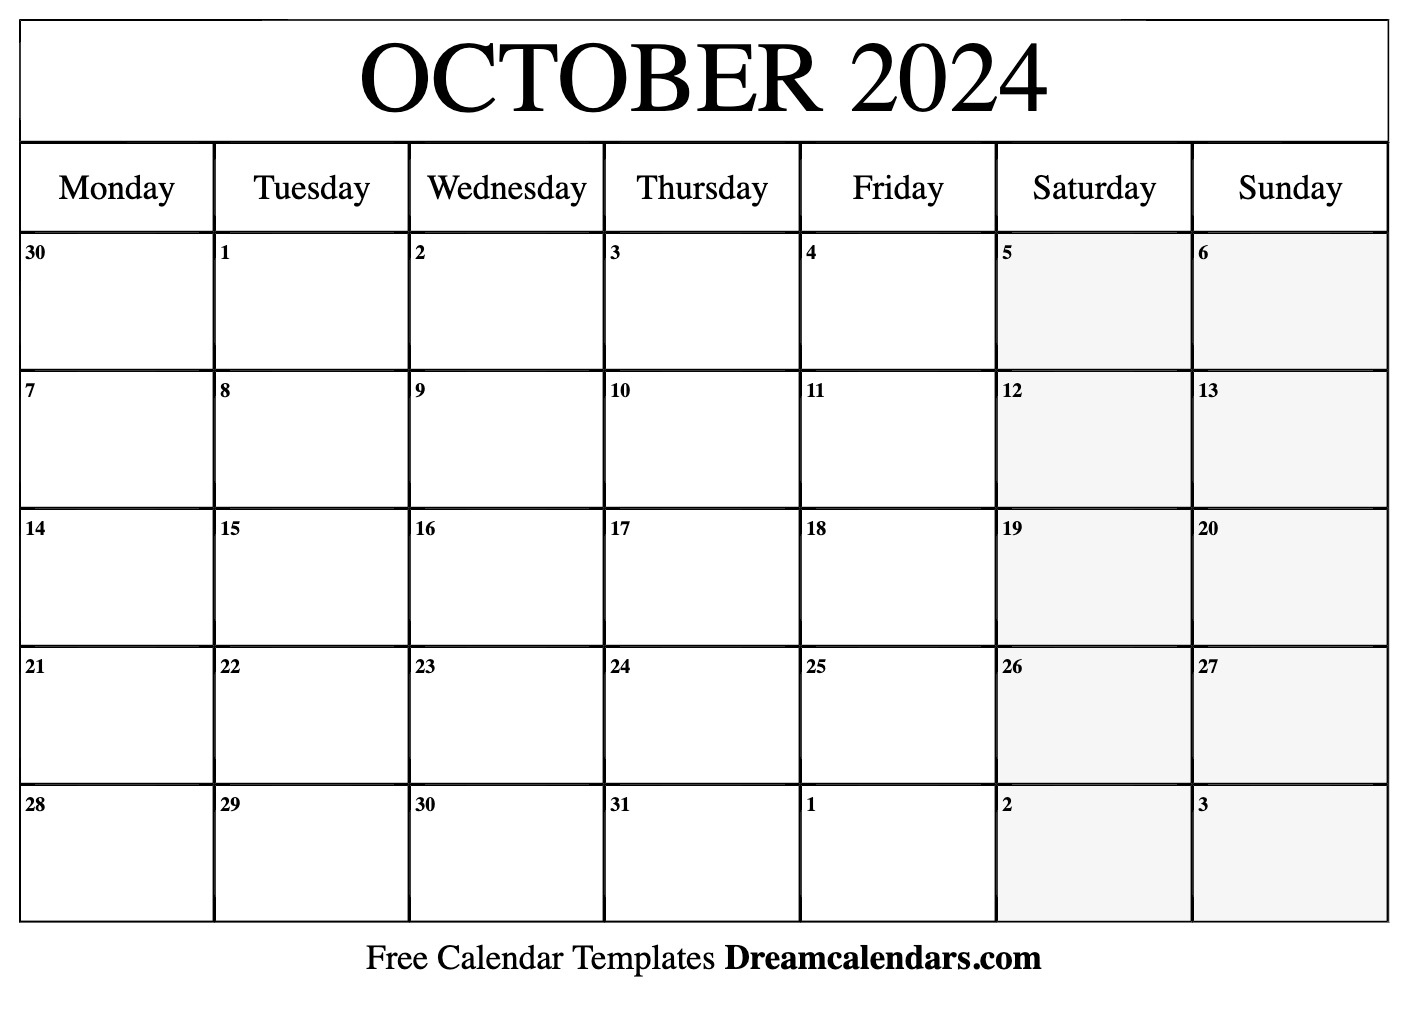 October 2024 Calendar | Free Blank Printable With Holidays | Free Printable Calendar October 2024